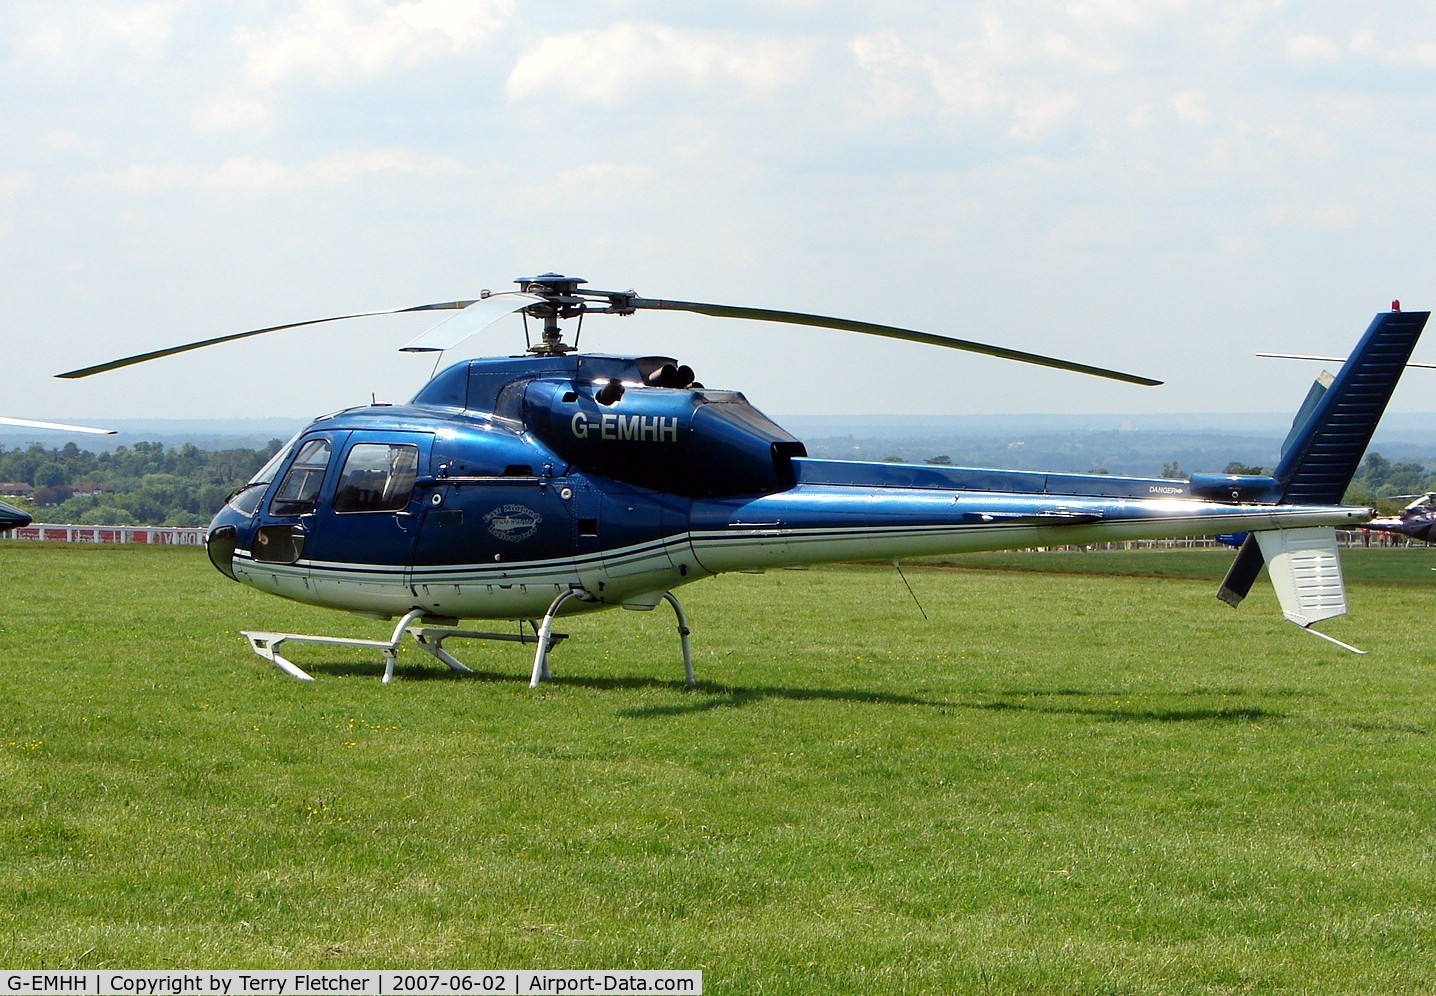 G-EMHH, 1990 Aerospatiale AS-355F-2 Ecureuil 2 C/N 5169, Helicopters arrive at the temporary Heliport on 2007 Epsom Derby Day (Horse racing)